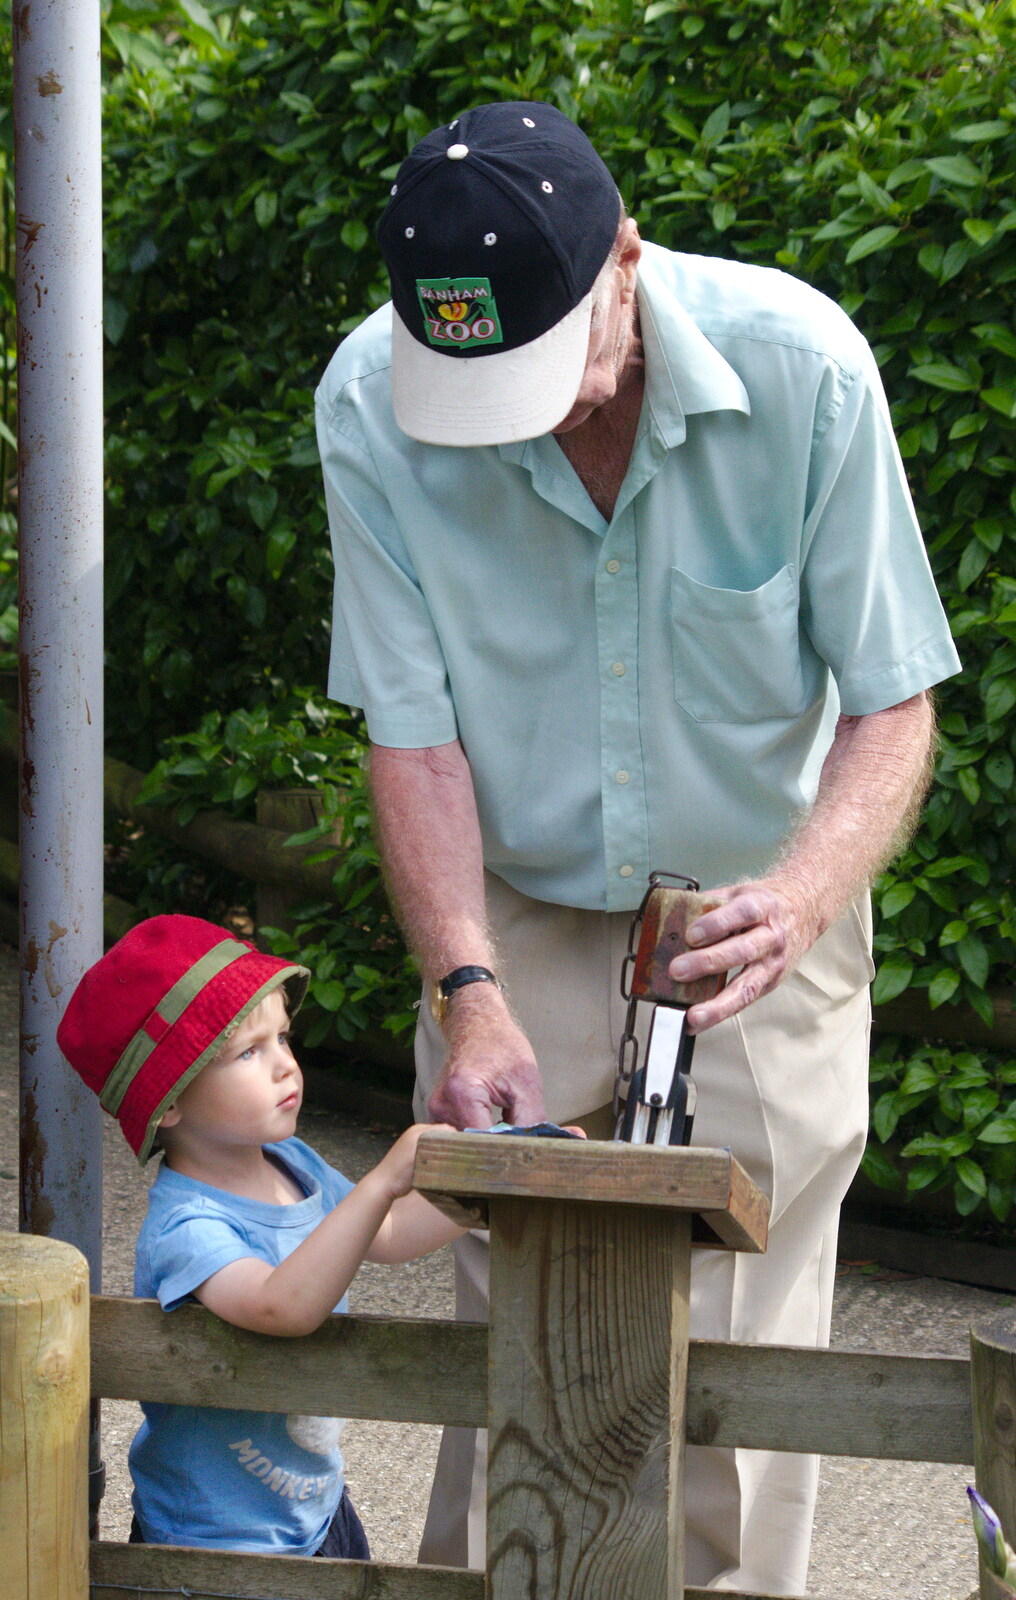 Grandad helps Harry with his passport stamp from A Birthday Trip to the Zoo, Banham, Norfolk - 26th May 2014